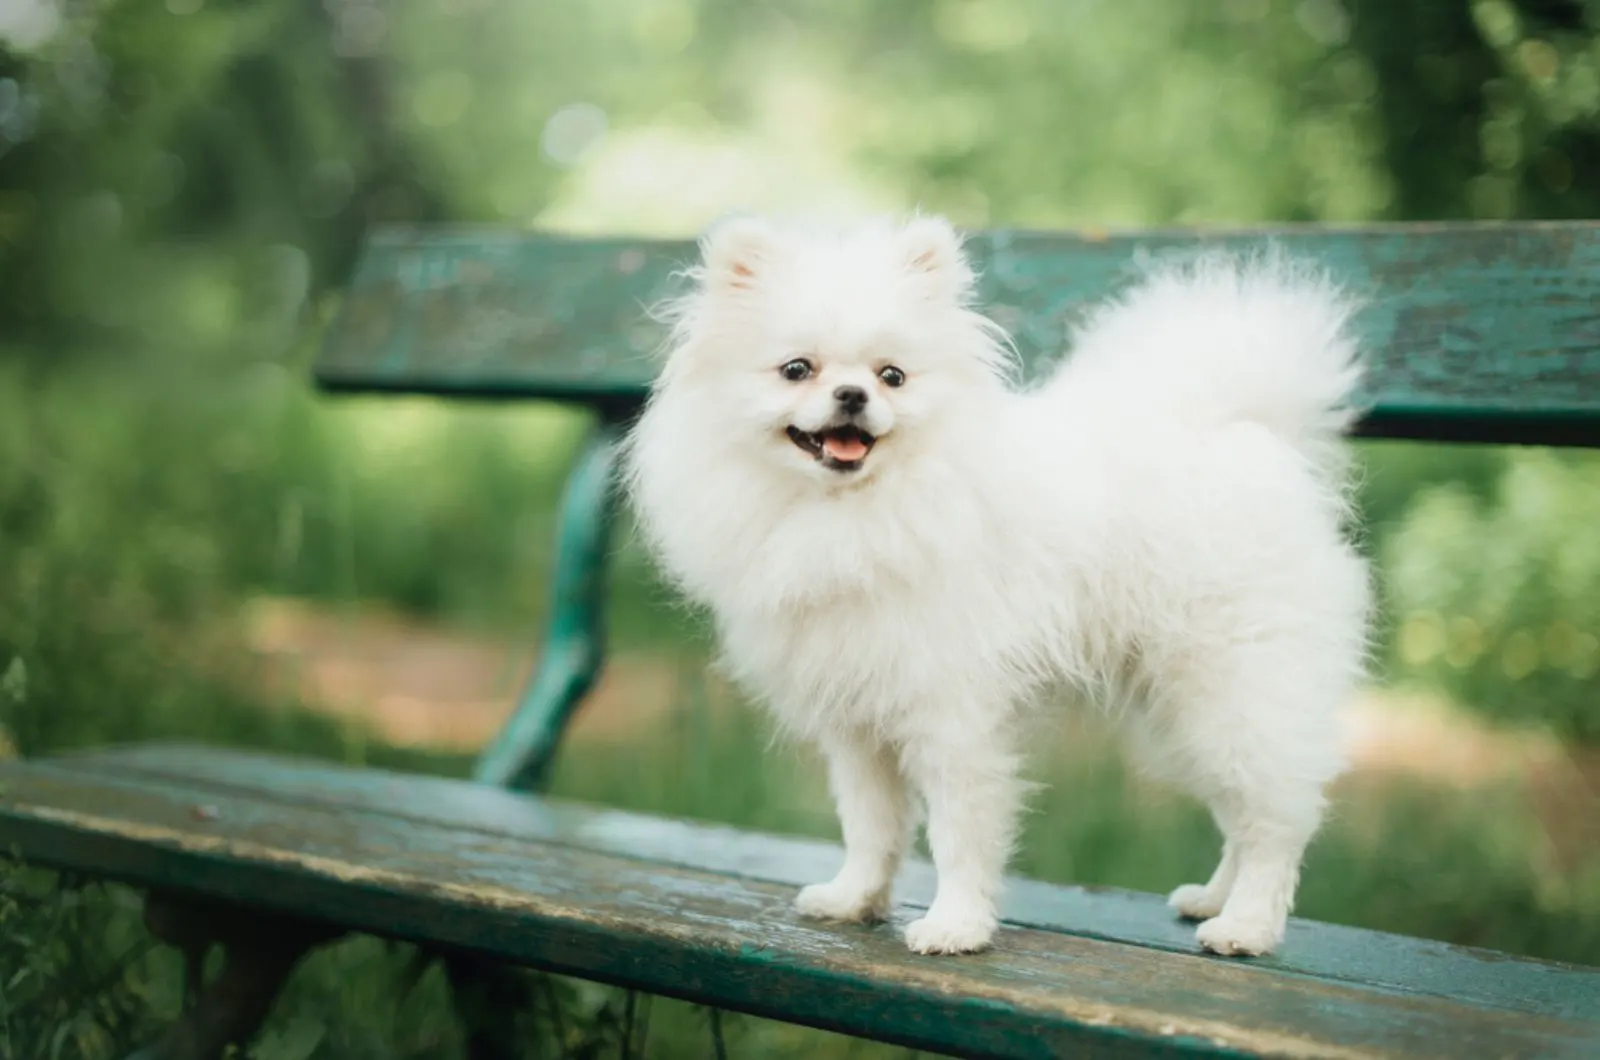 pomeranian dog standing on the bench